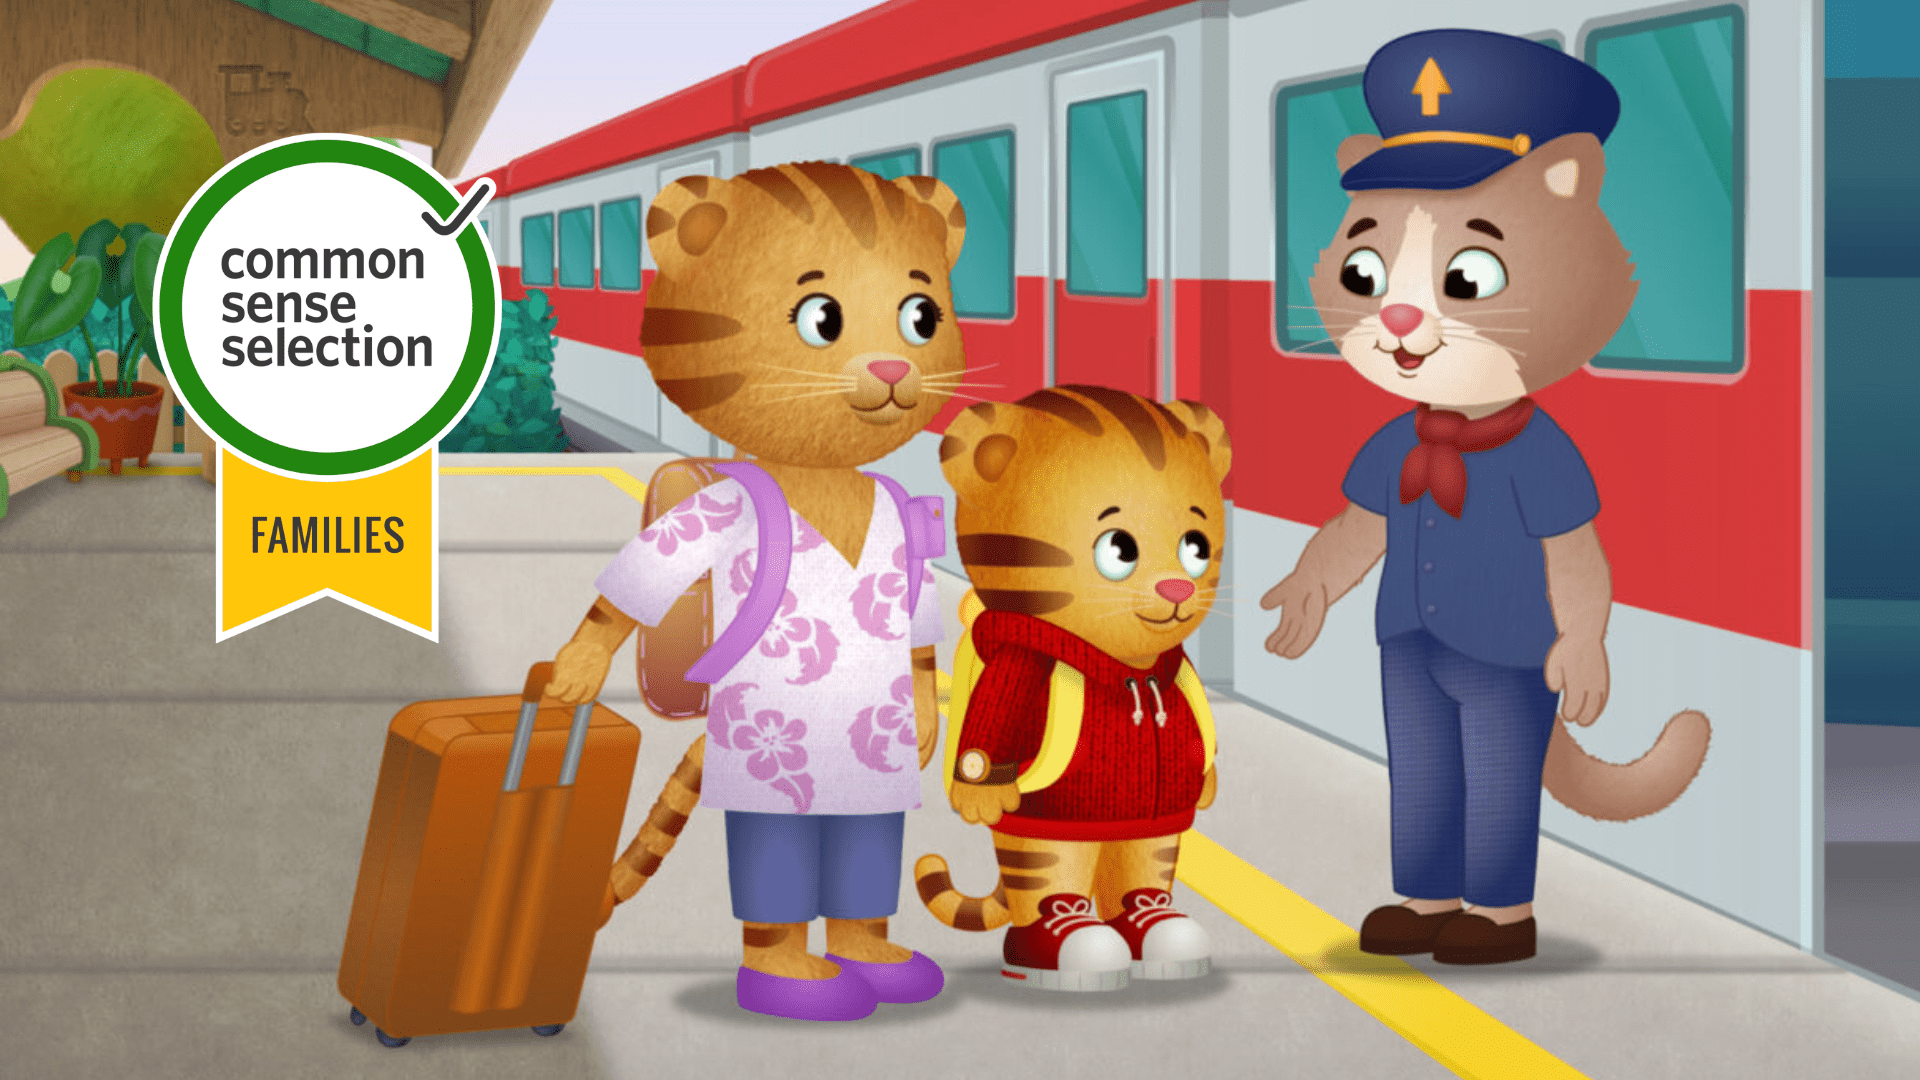 Daniel Tiger's Neighborhood - “In some ways we are different, but